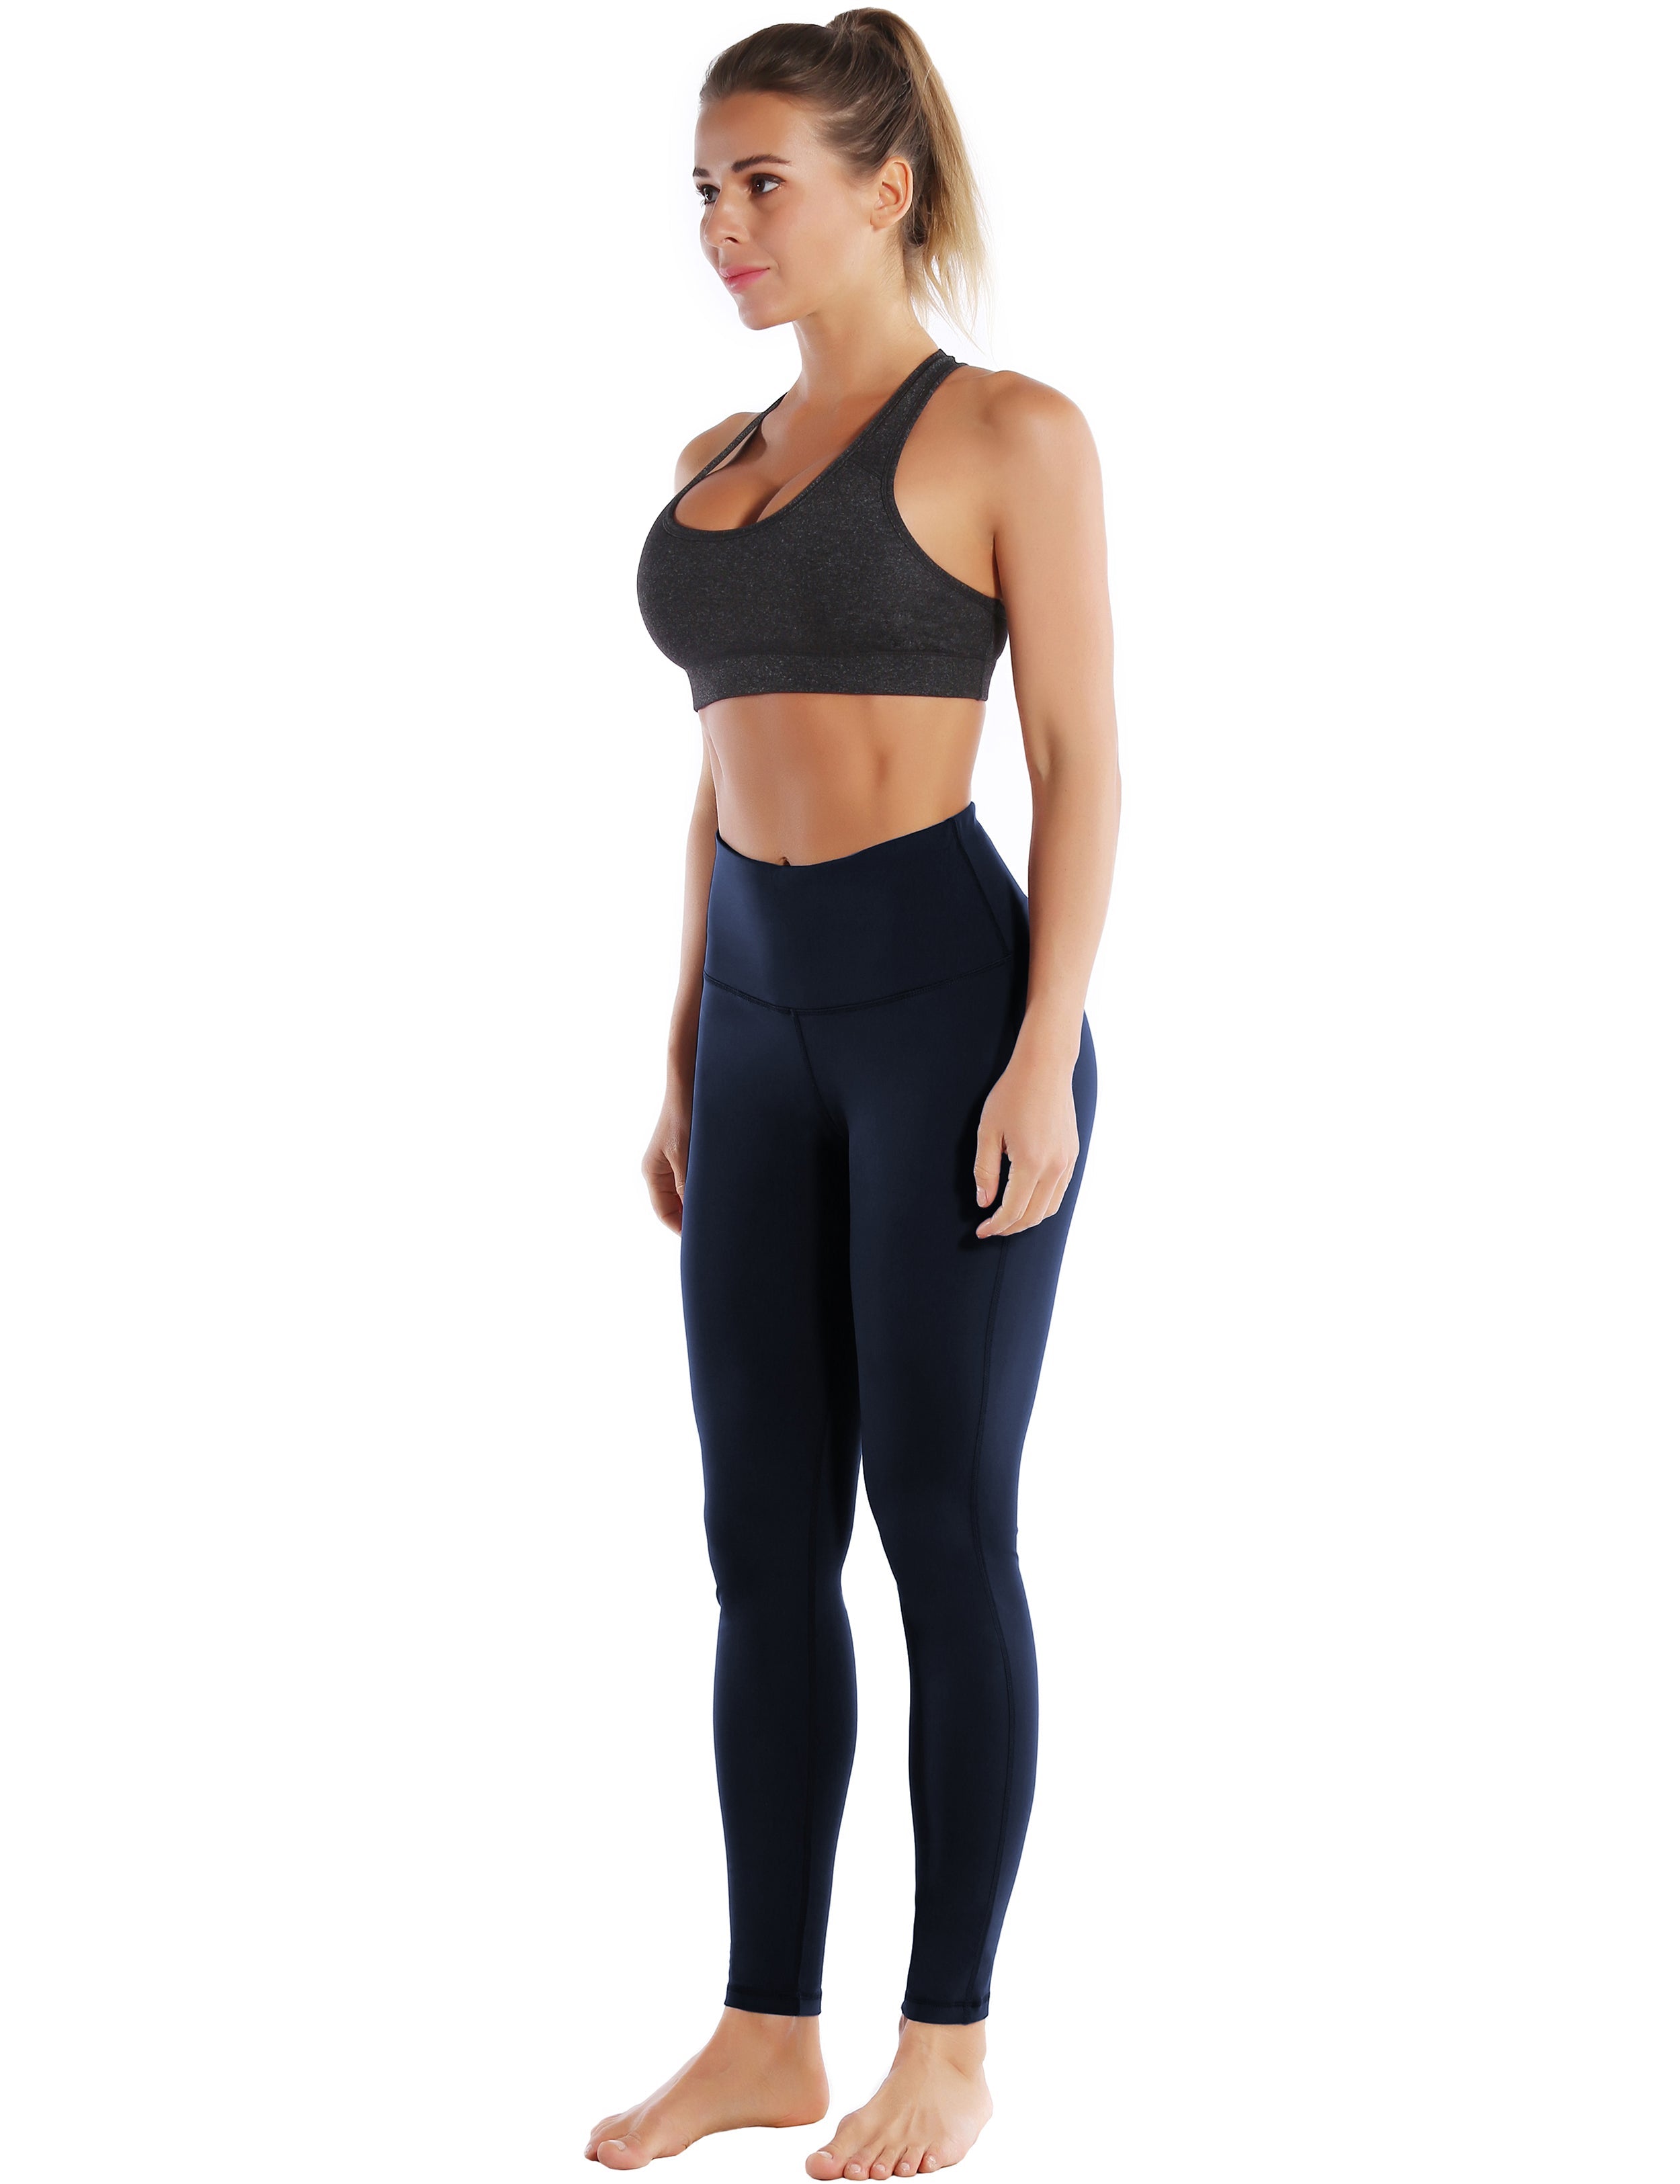 High Waist Side Line Jogging Pants darknavy Side Line is Make Your Legs Look Longer and Thinner 75%Nylon/25%Spandex Fabric doesn't attract lint easily 4-way stretch No see-through Moisture-wicking Tummy control Inner pocket Two lengths